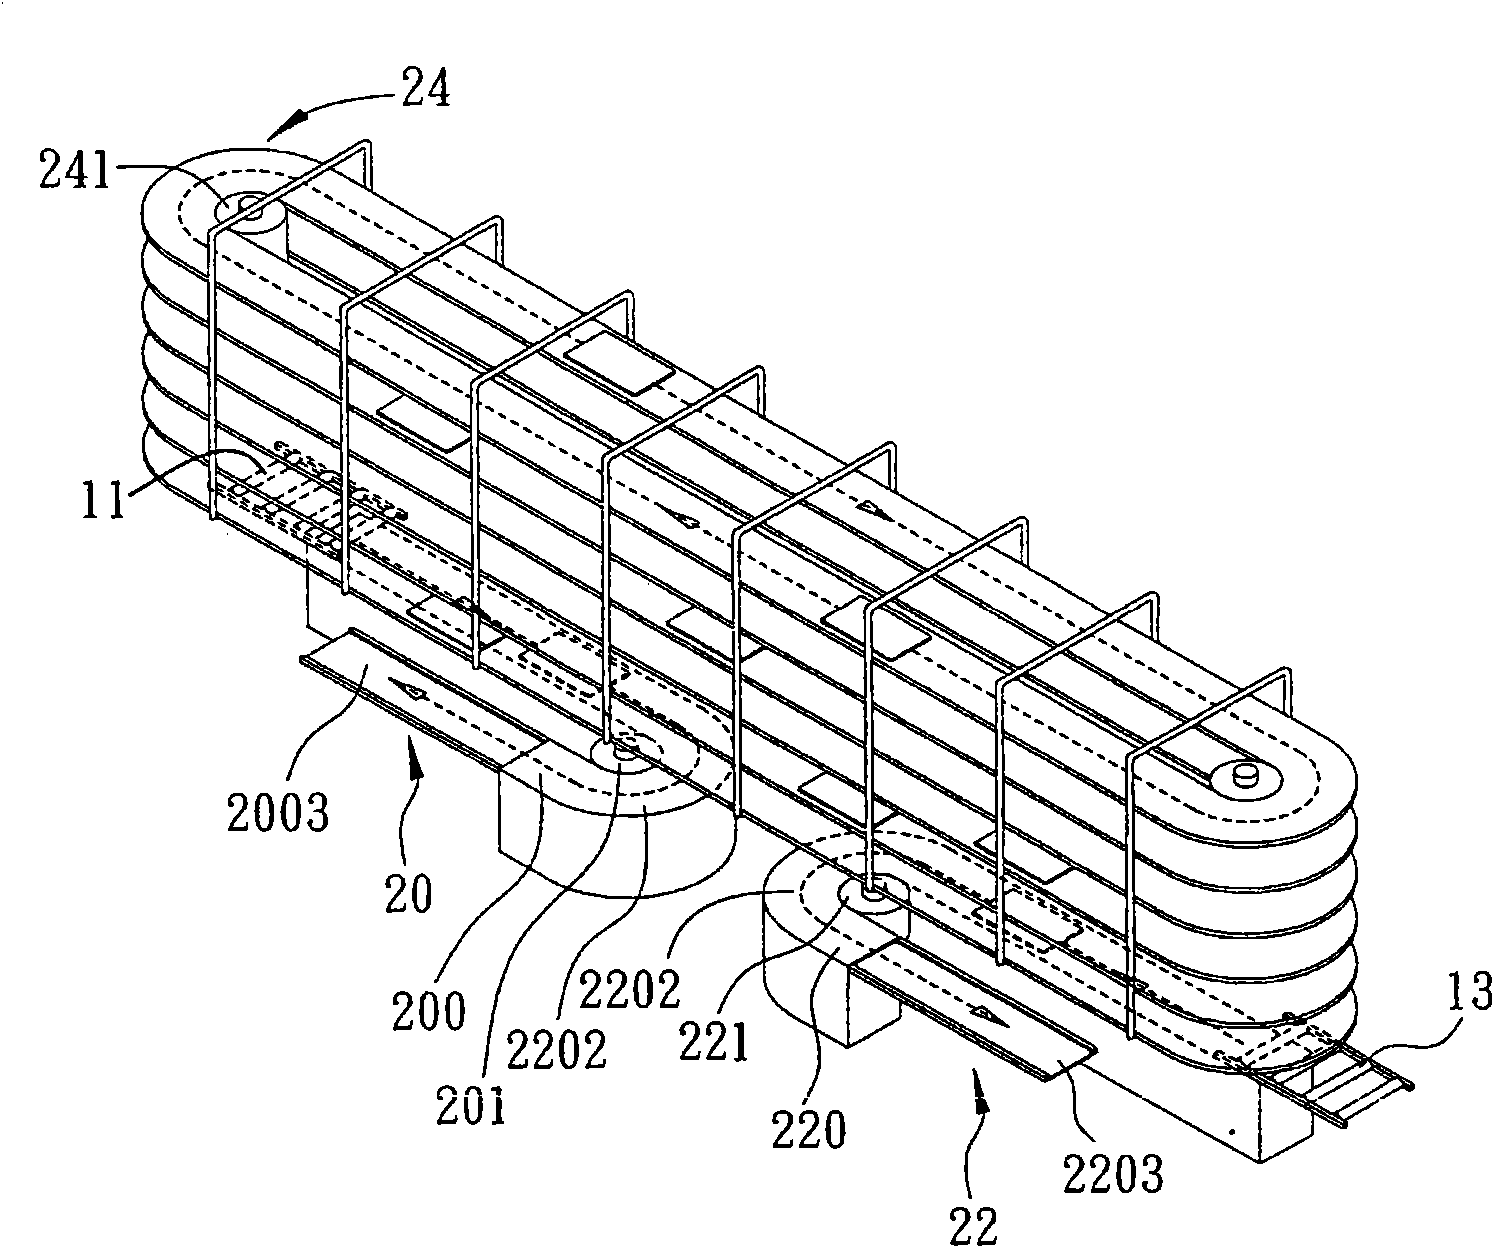 Circular assembly line and method for assembling product by using same